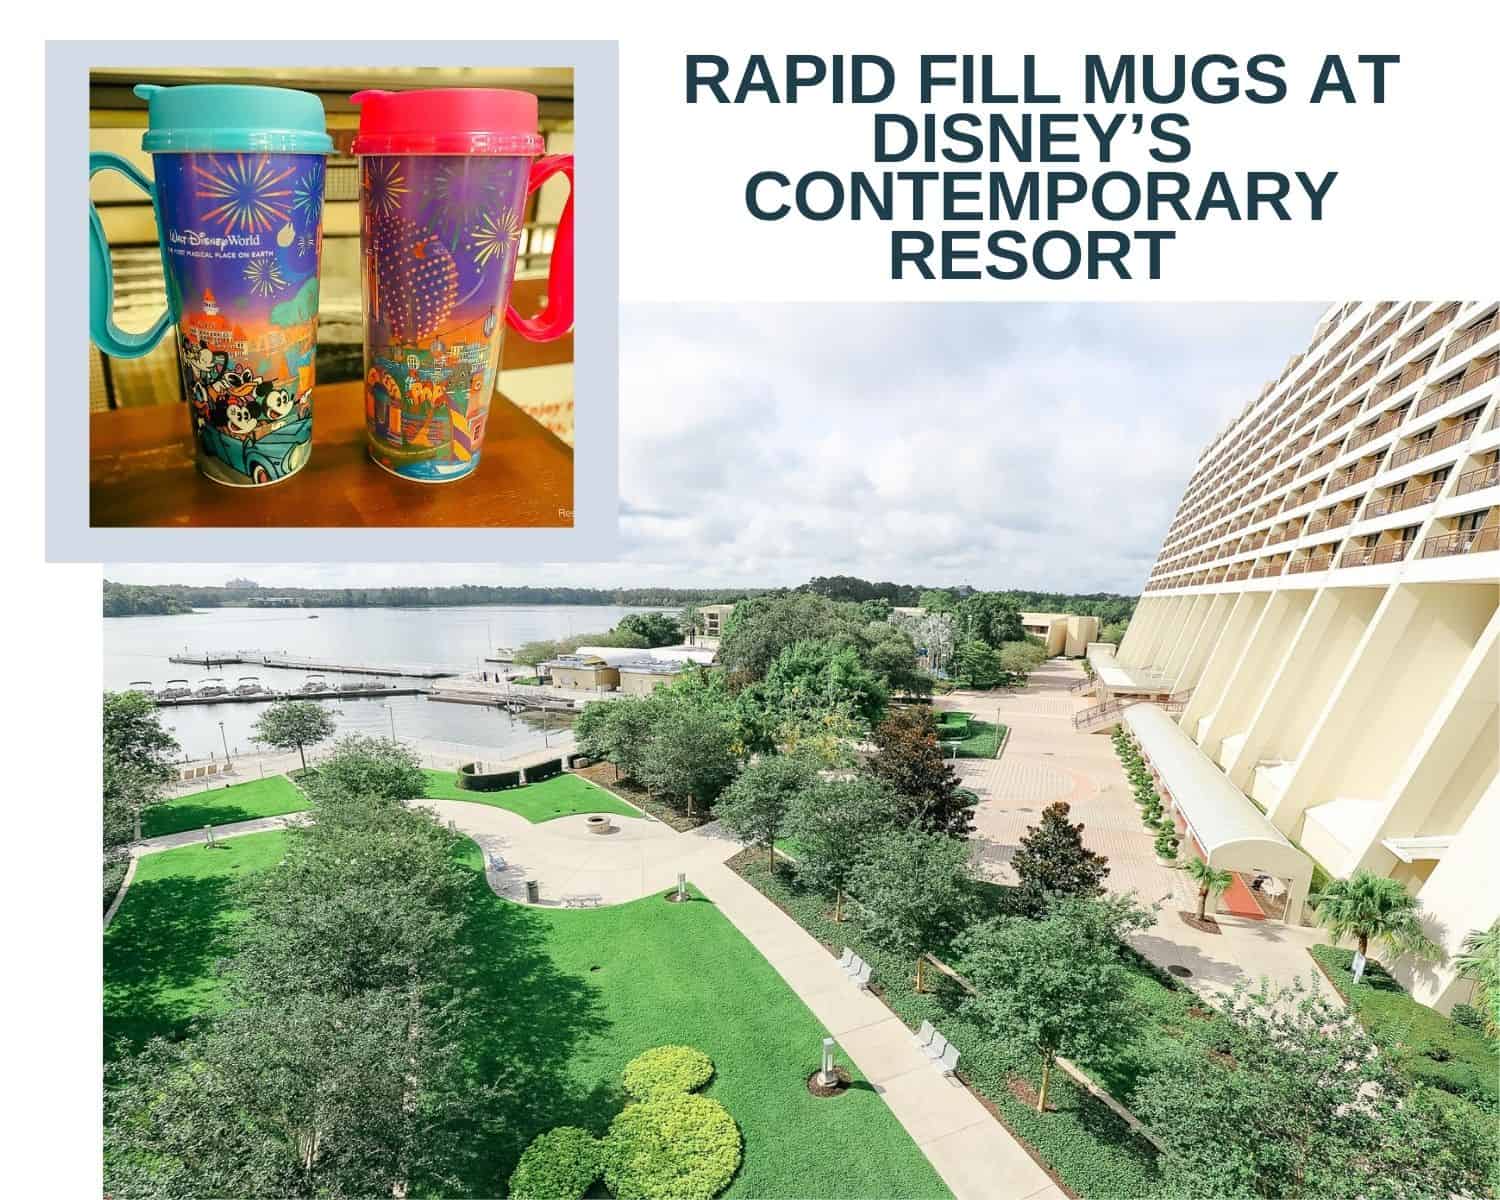 The 2 Places to Refill Rapid Fill Mugs at Disney’s Contemporary & Bay Lake Tower (1)